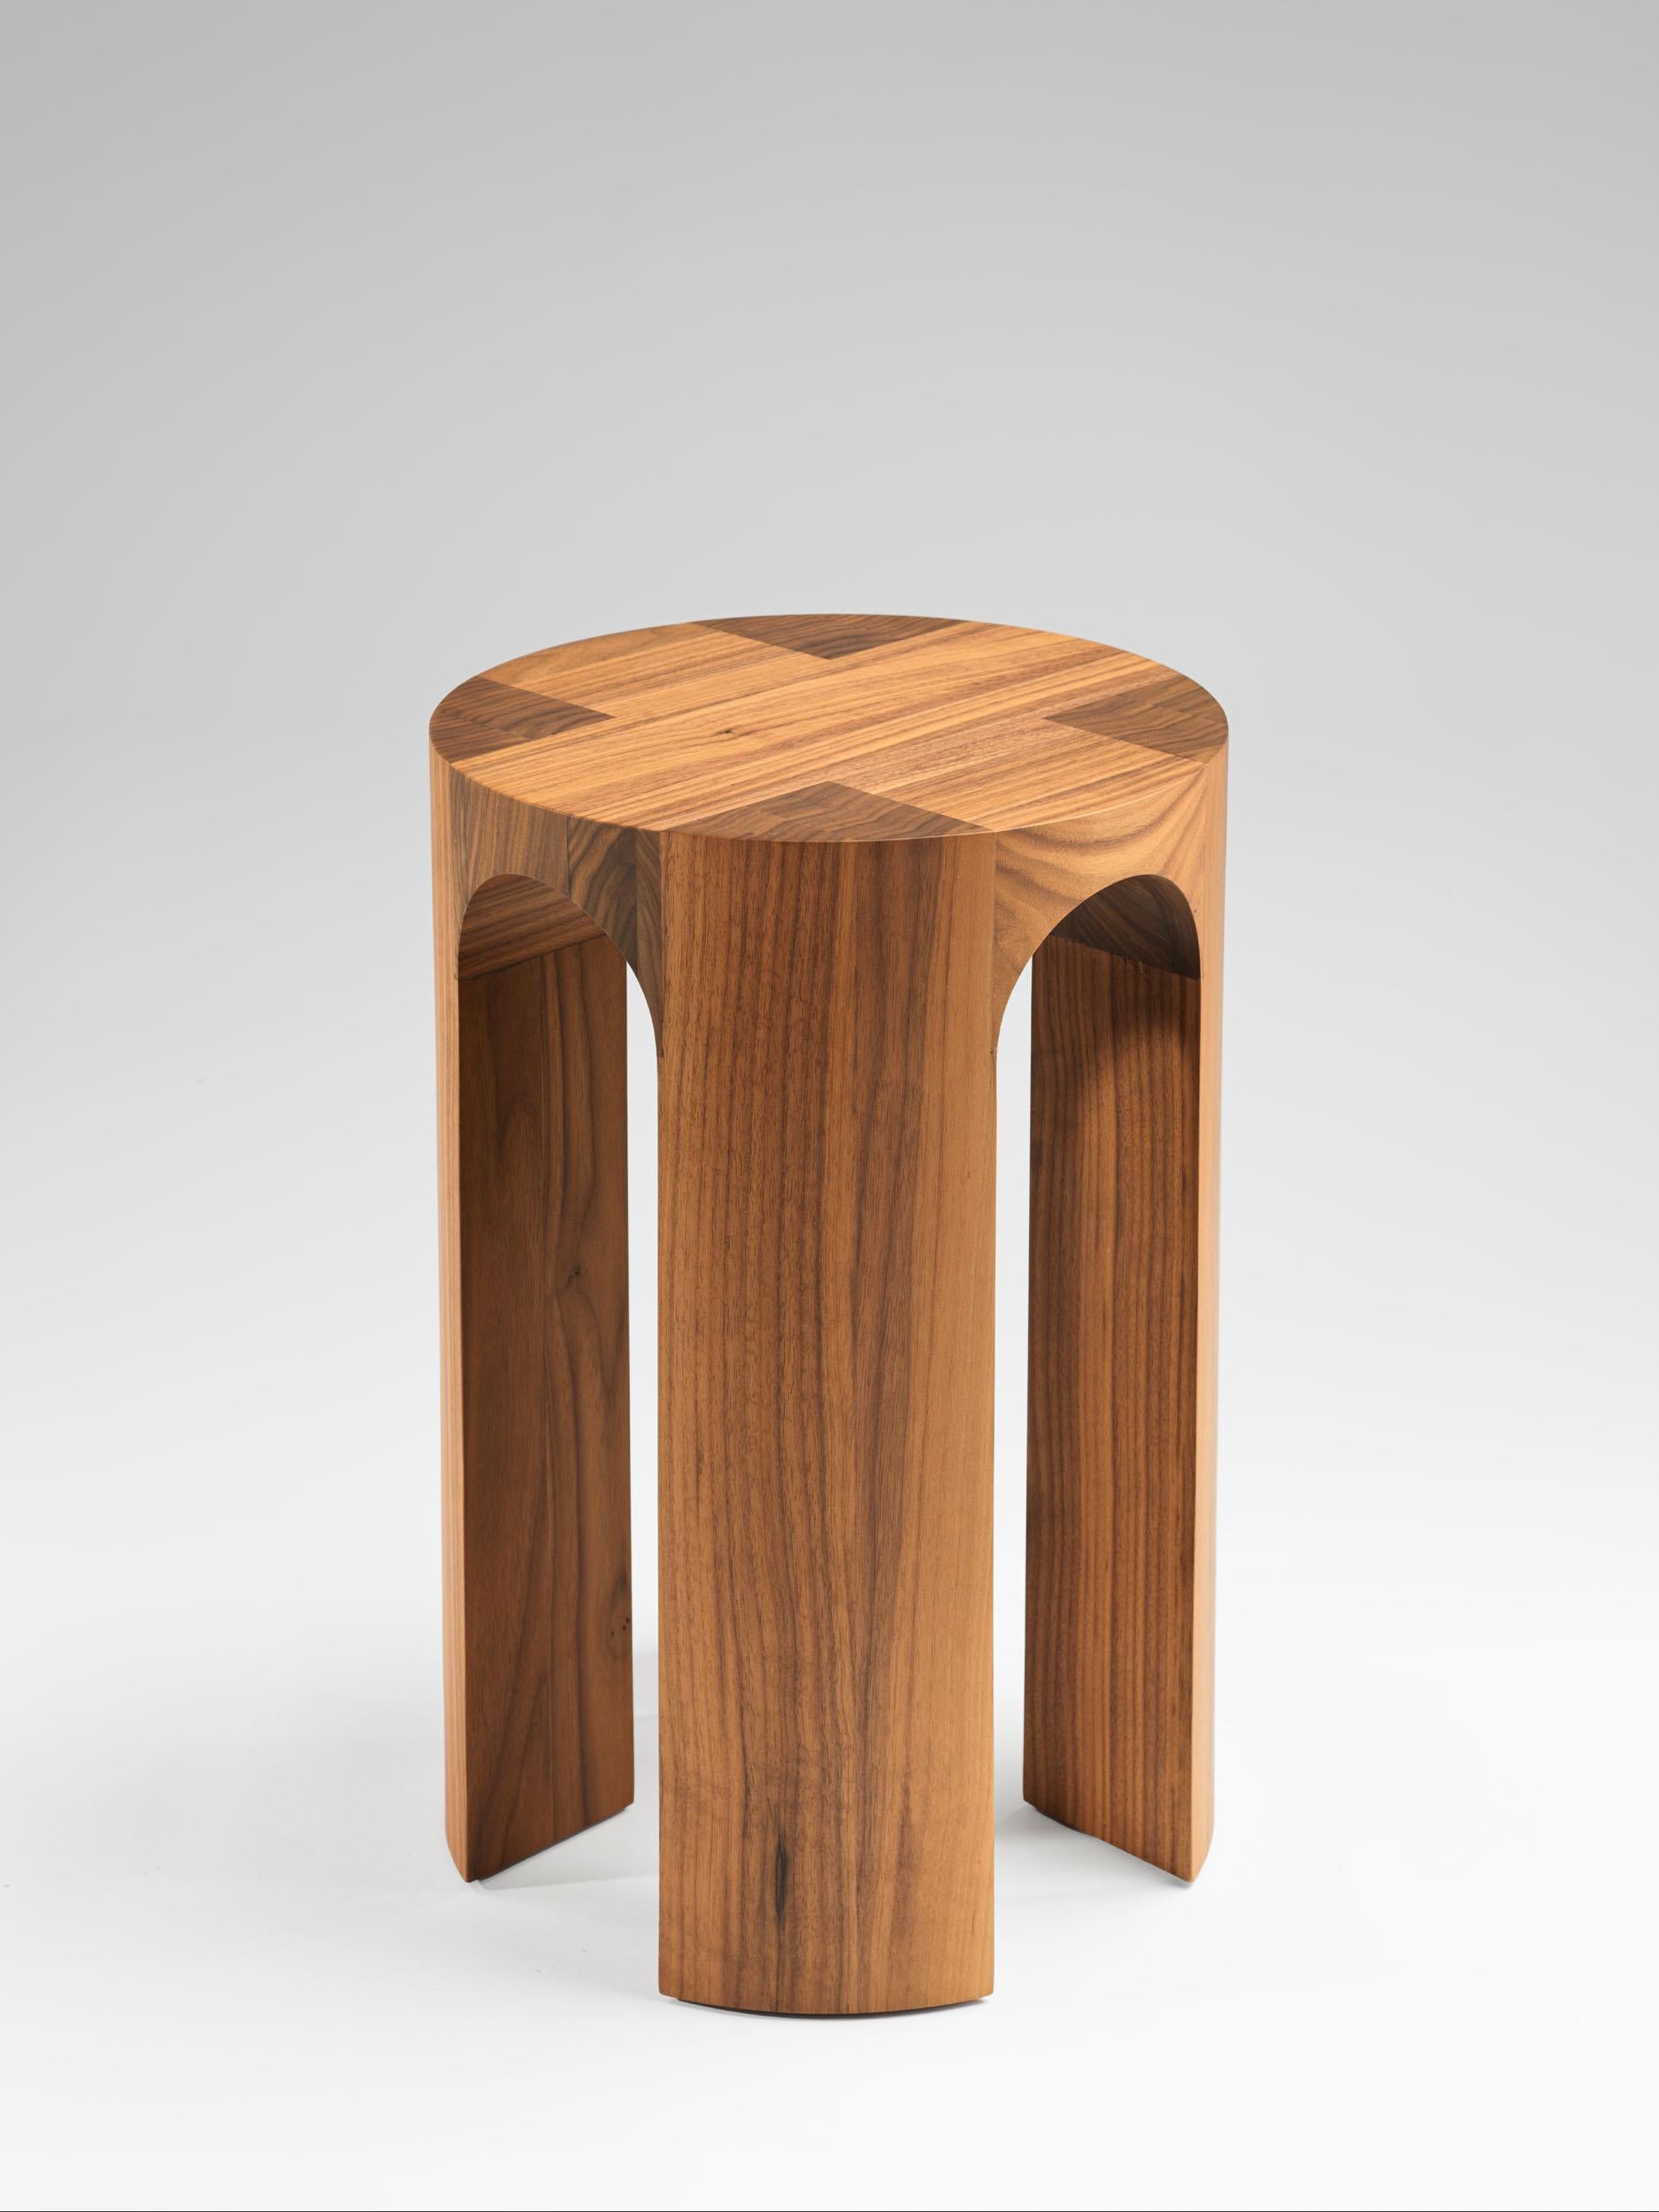 Arcus walnut stool by Tim Vranken
Materials: American Walnut
Dimensions: 30.5 x H 45 cm 


Tim Vranken is a Belgian furniture designer who focuses on solid, handmade furniture. Throughout his designs the use of pure materials and honest natural